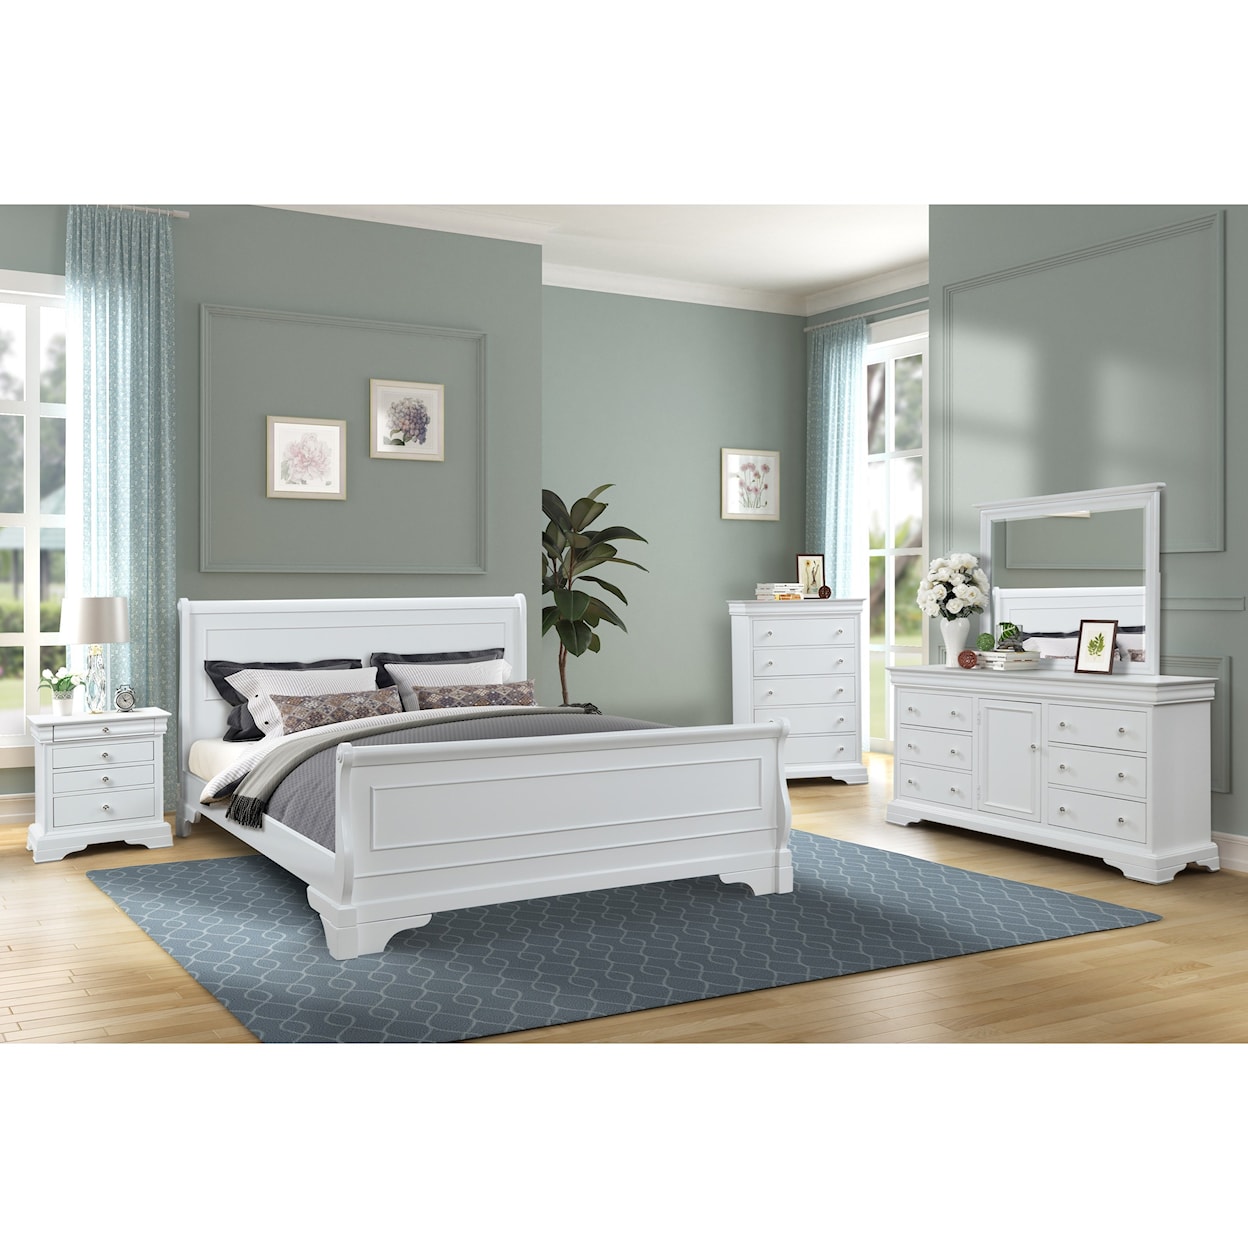 New Classic Versaille California King Bedroom Group